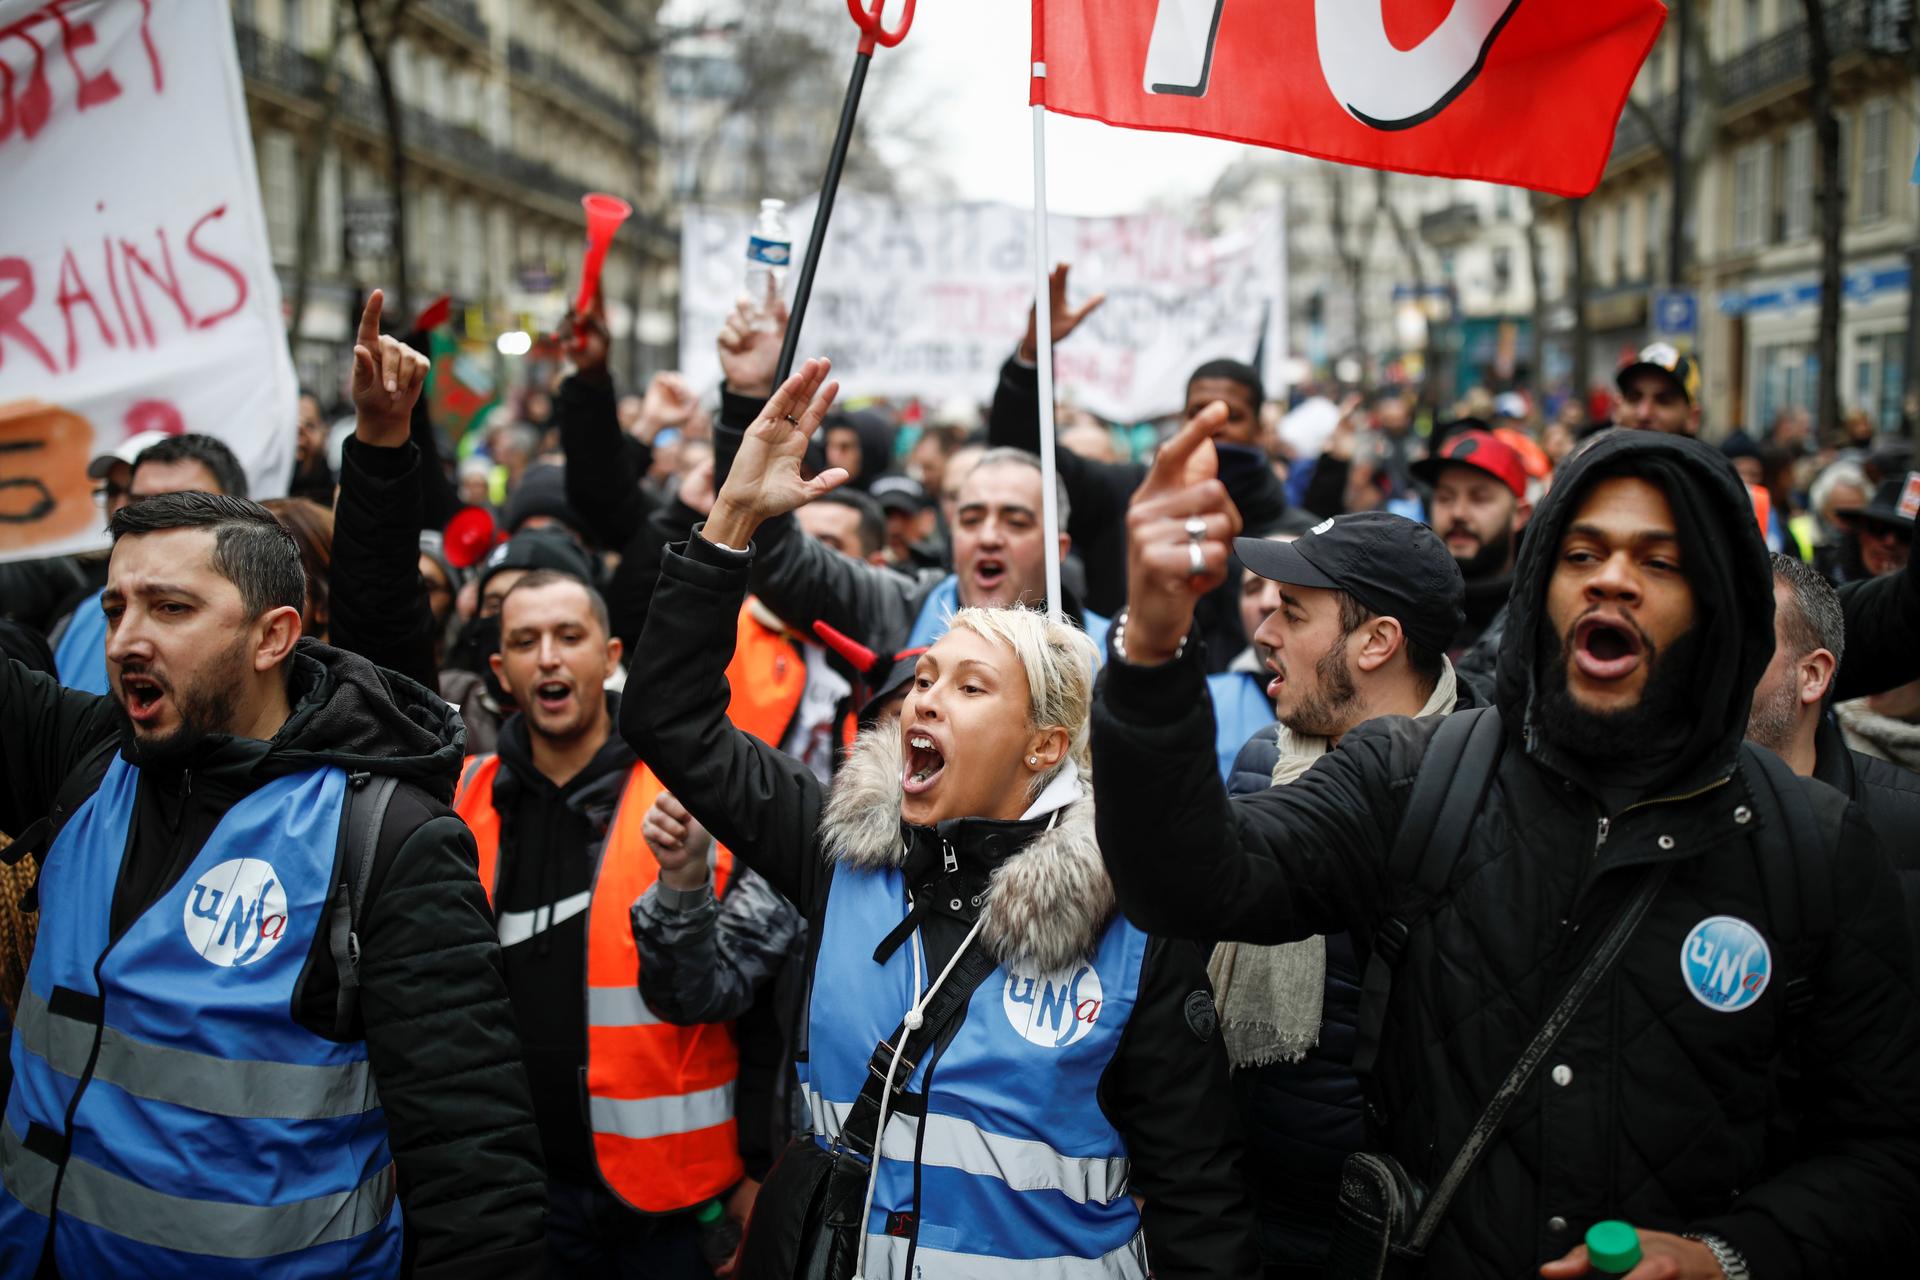 Scuffles break out in Paris as pensions protesters, 'yellow vests' march